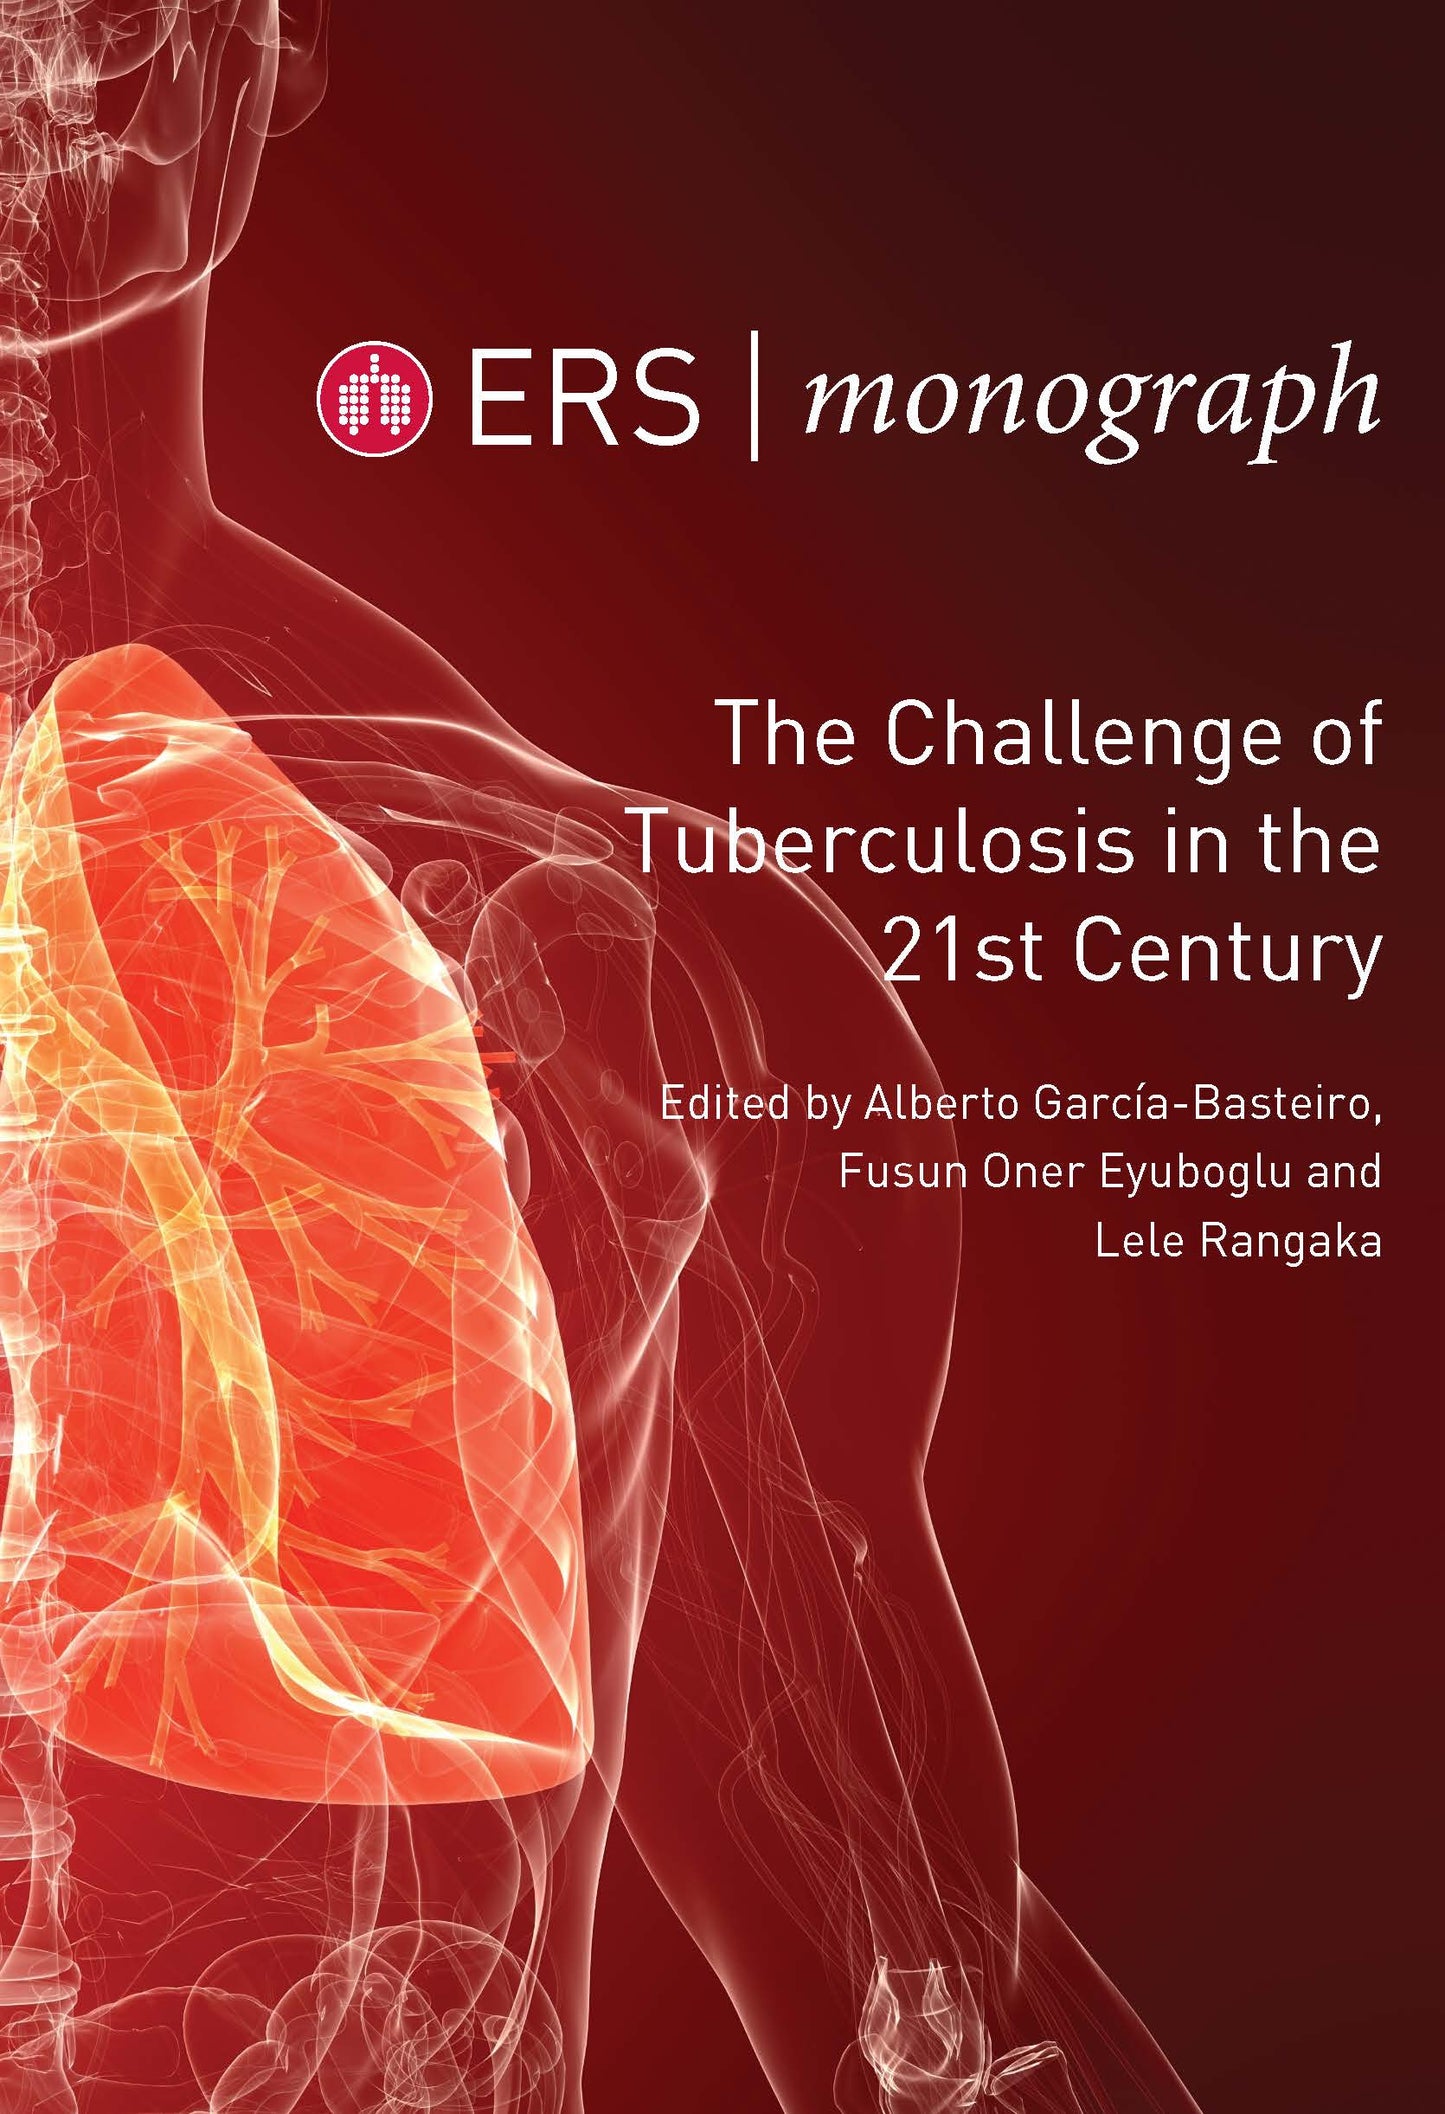 The Challenge of Tuberculosis in the 21st Century